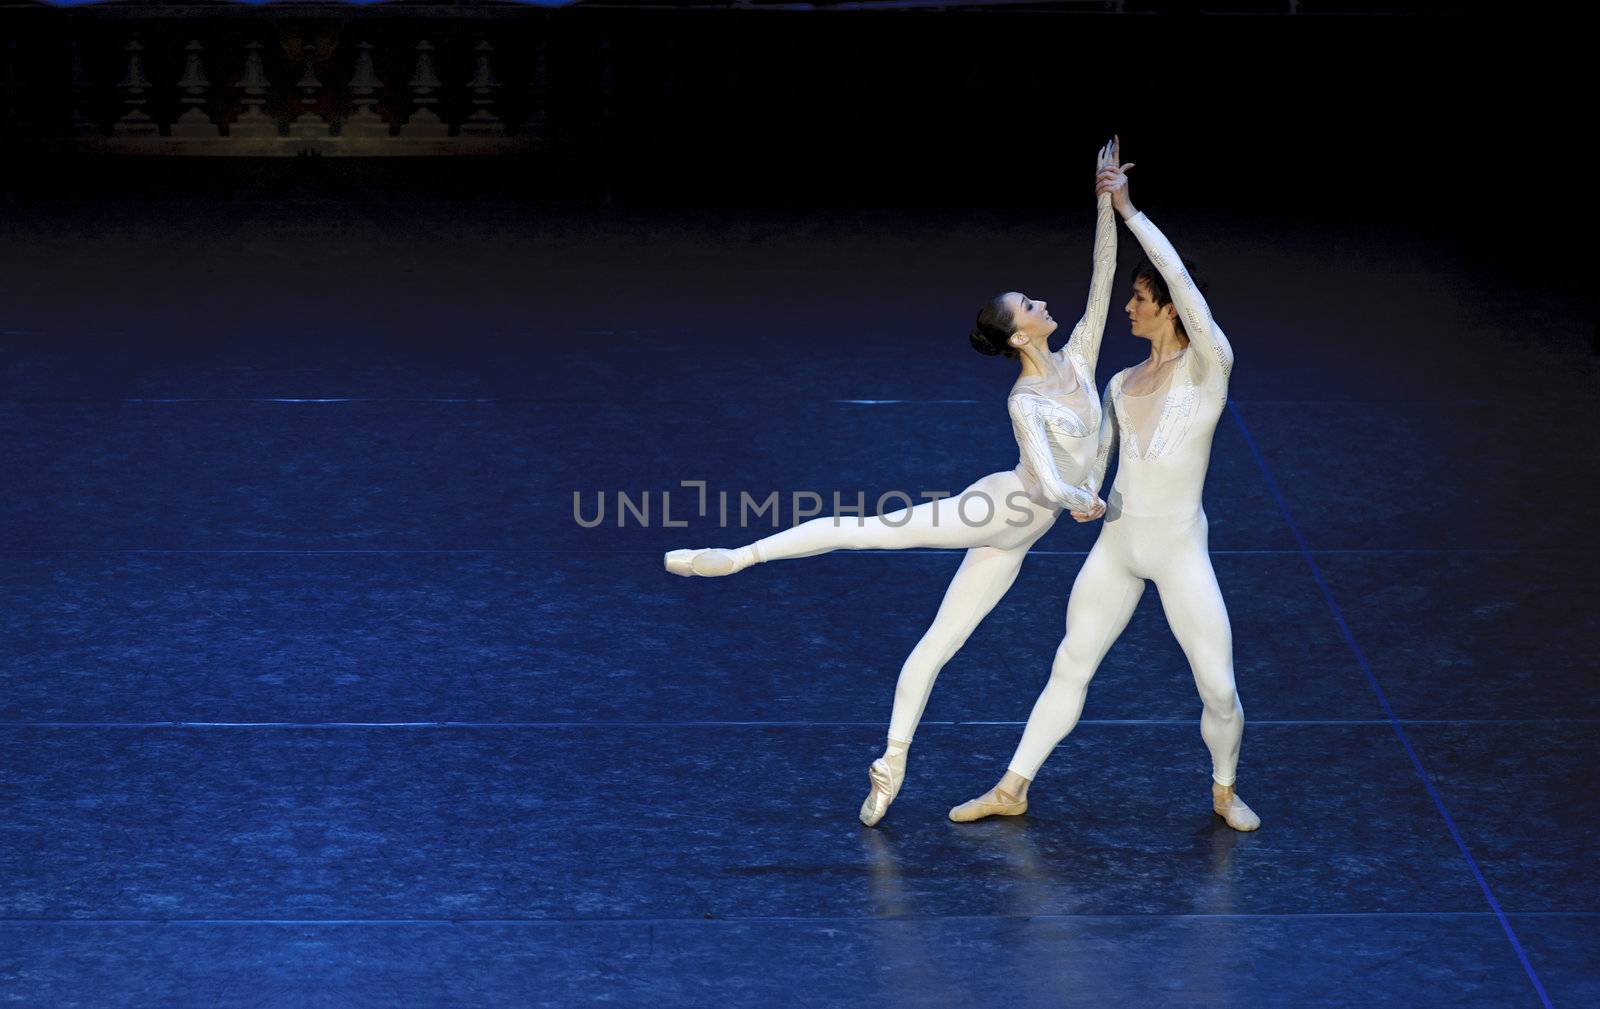 CHENGDU - JAN 5: The national ballet of china perform on stage at Jincheng theater.Jan 5, 2012 in Chengdu, China.